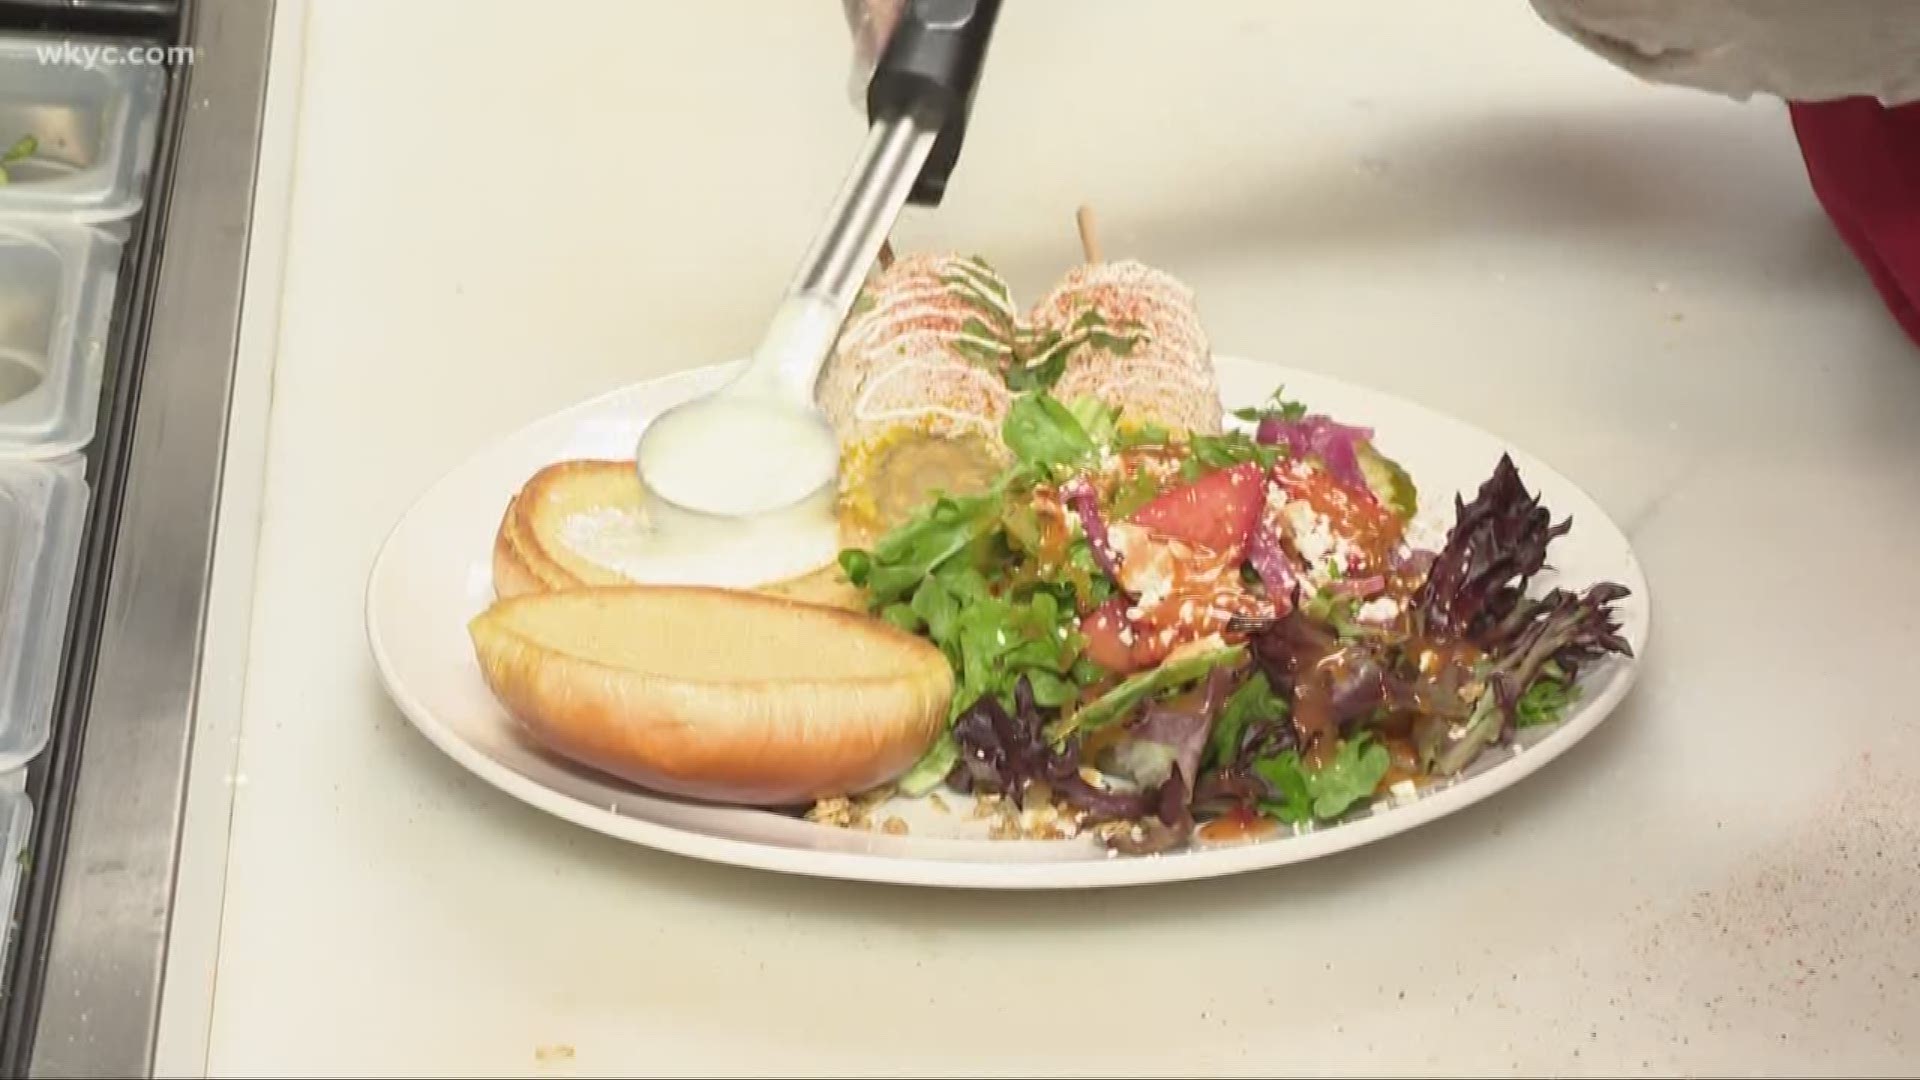 Jan. 22, 2019: Hungry? You will be! WKYC's Jasmine Monroe takes us on a tour of what the new Ohio City Galley is all about.